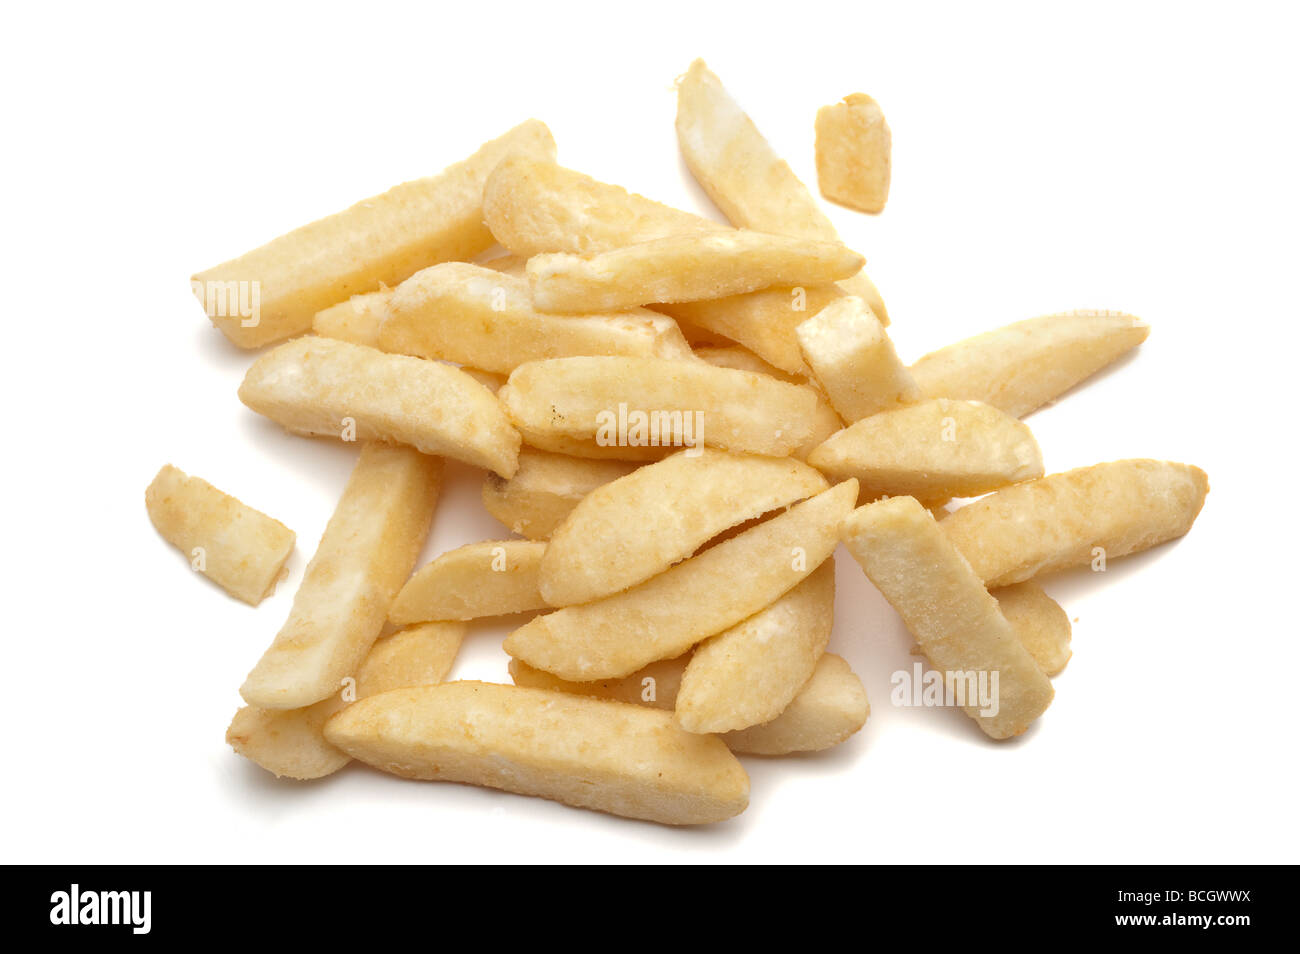 Pile of frozen 'oven ready' chips Stock Photo